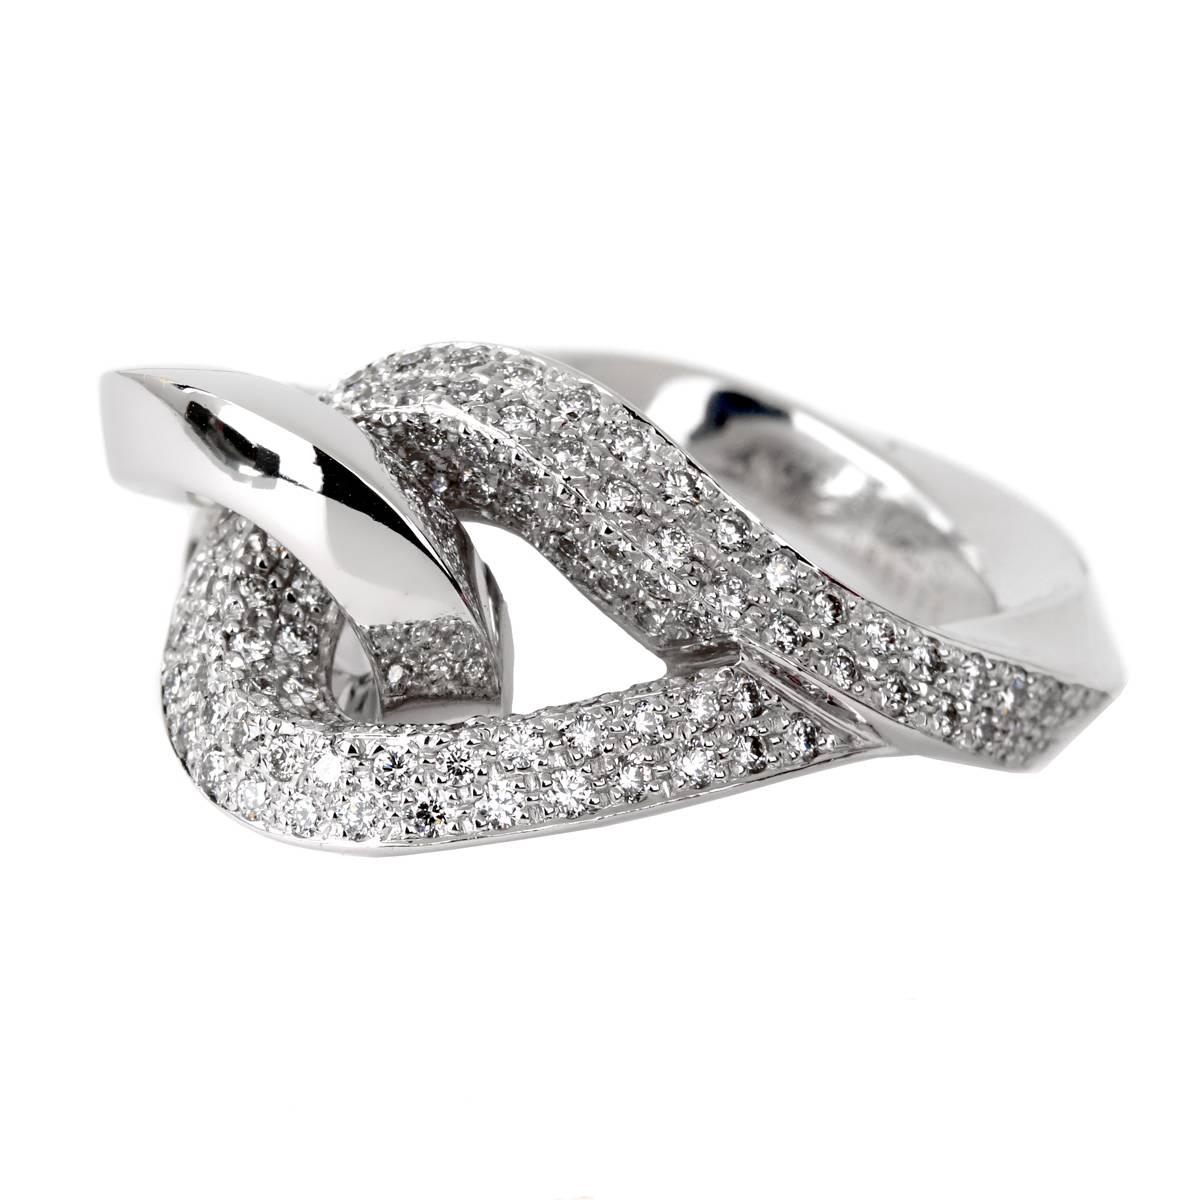 A magnificent Hermes diamond ring featuring the finest Hermes diamond paved in 18k white gold. The twisted design creates a unique cocktail ring perfect for any night out.

SIZE: EU 53 / US 6 1/4

Sku: 856